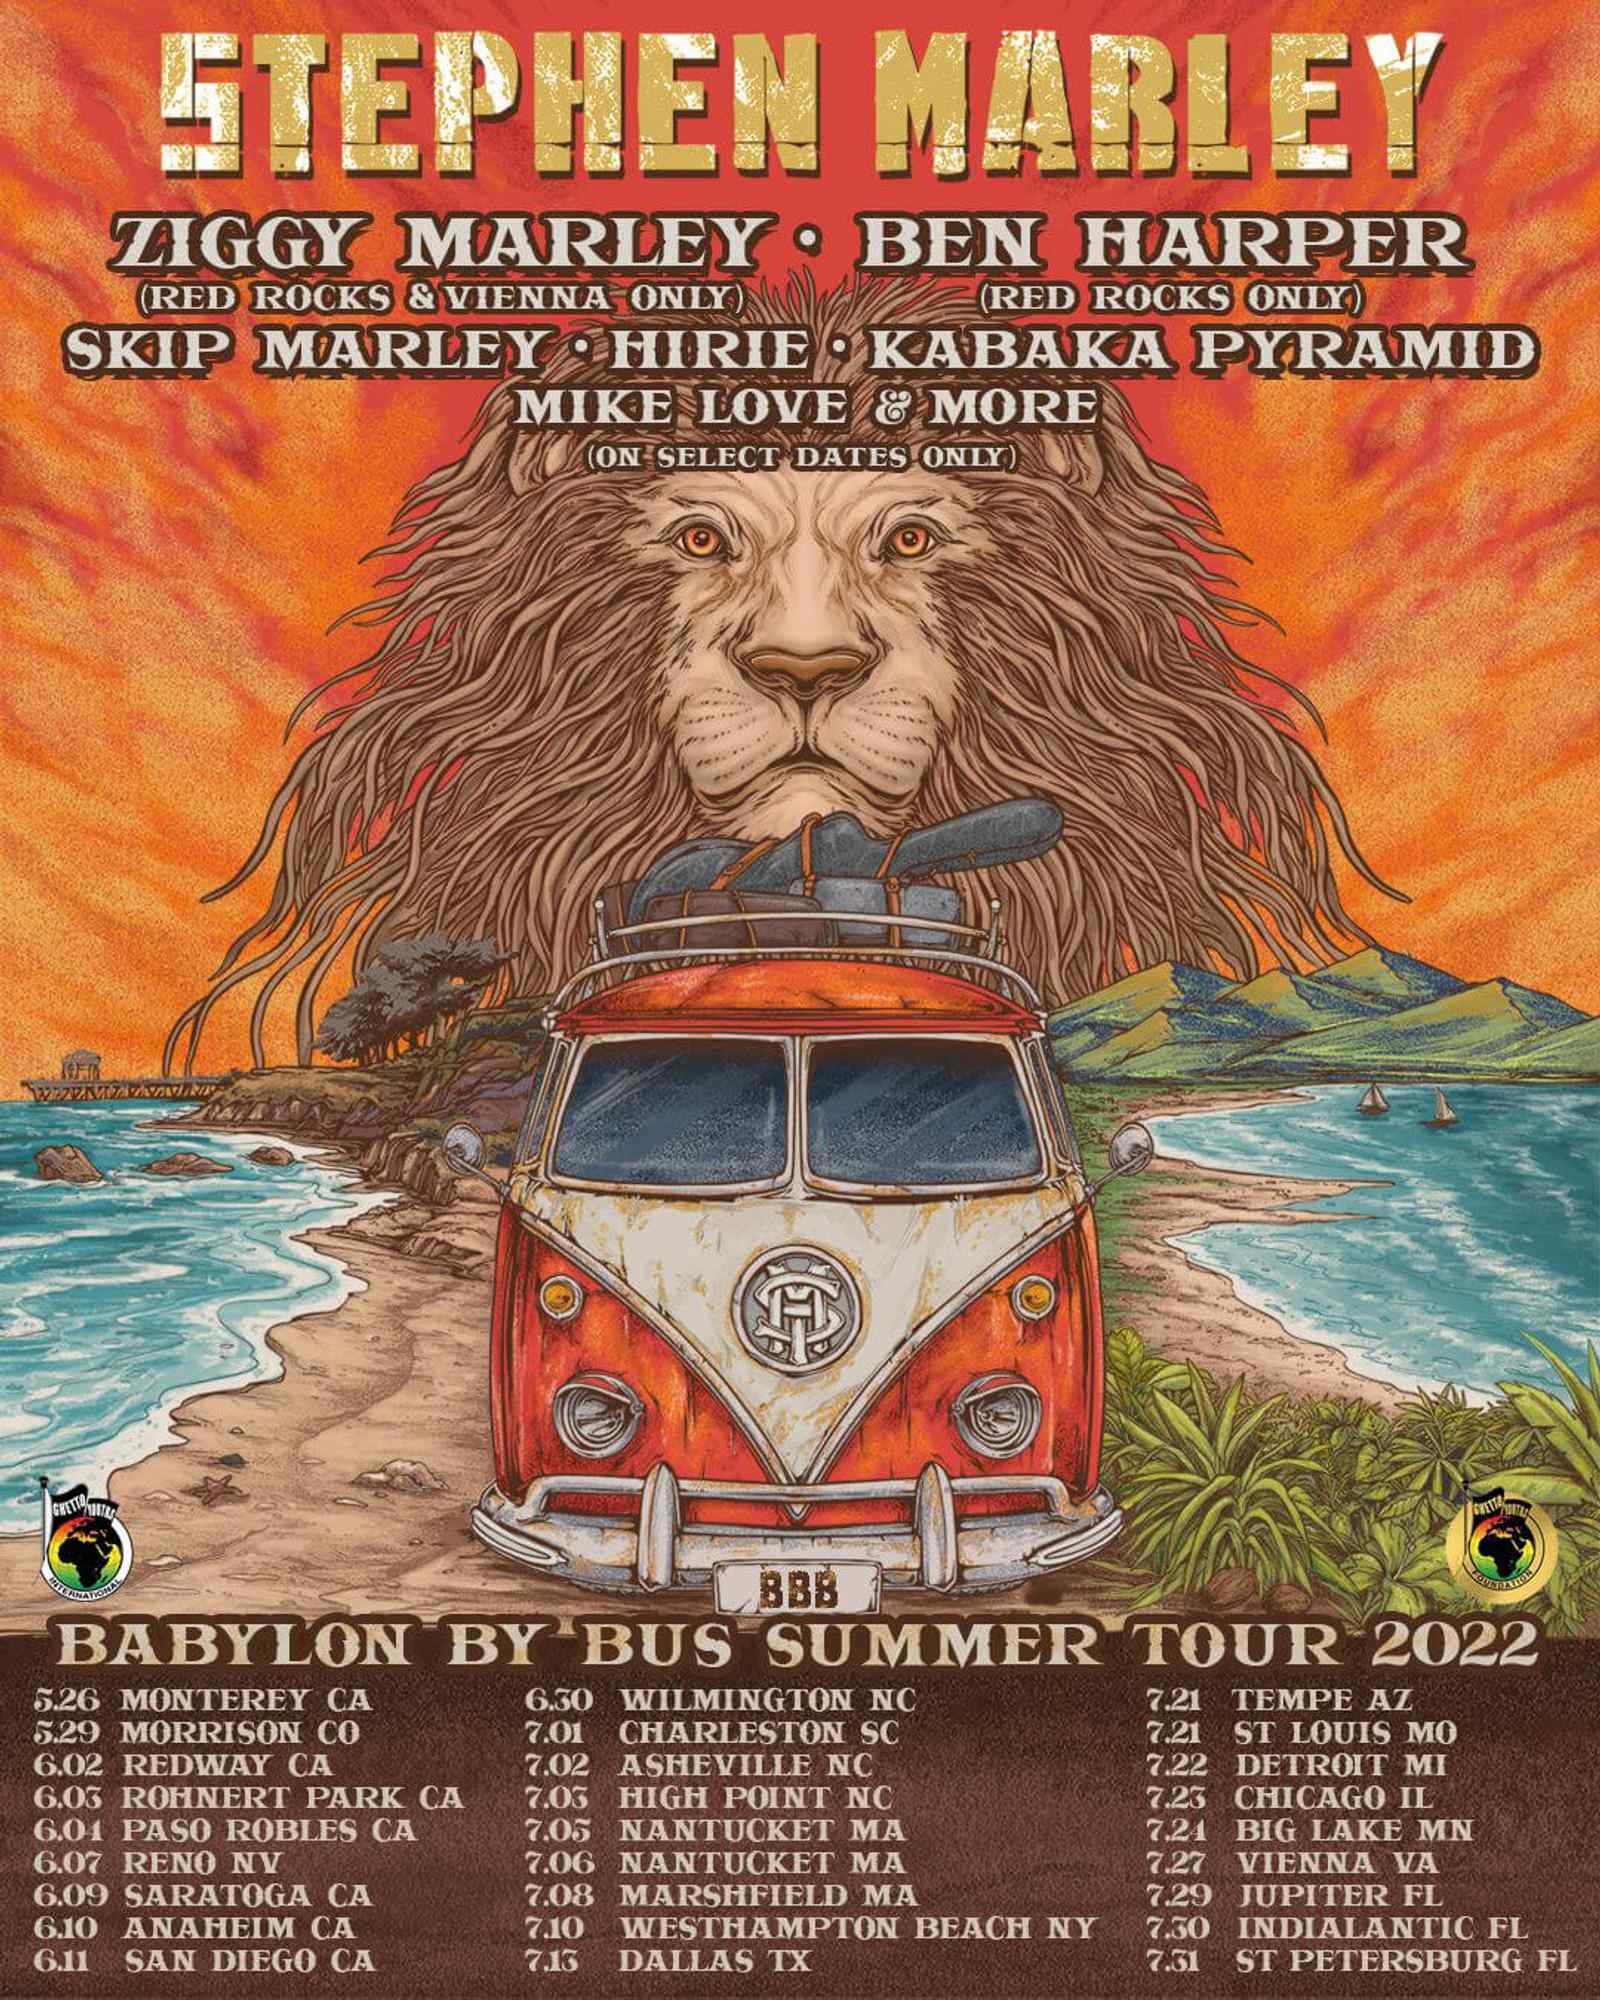 More Dates Added To The Babylon By Bus Summer Tour 2022!